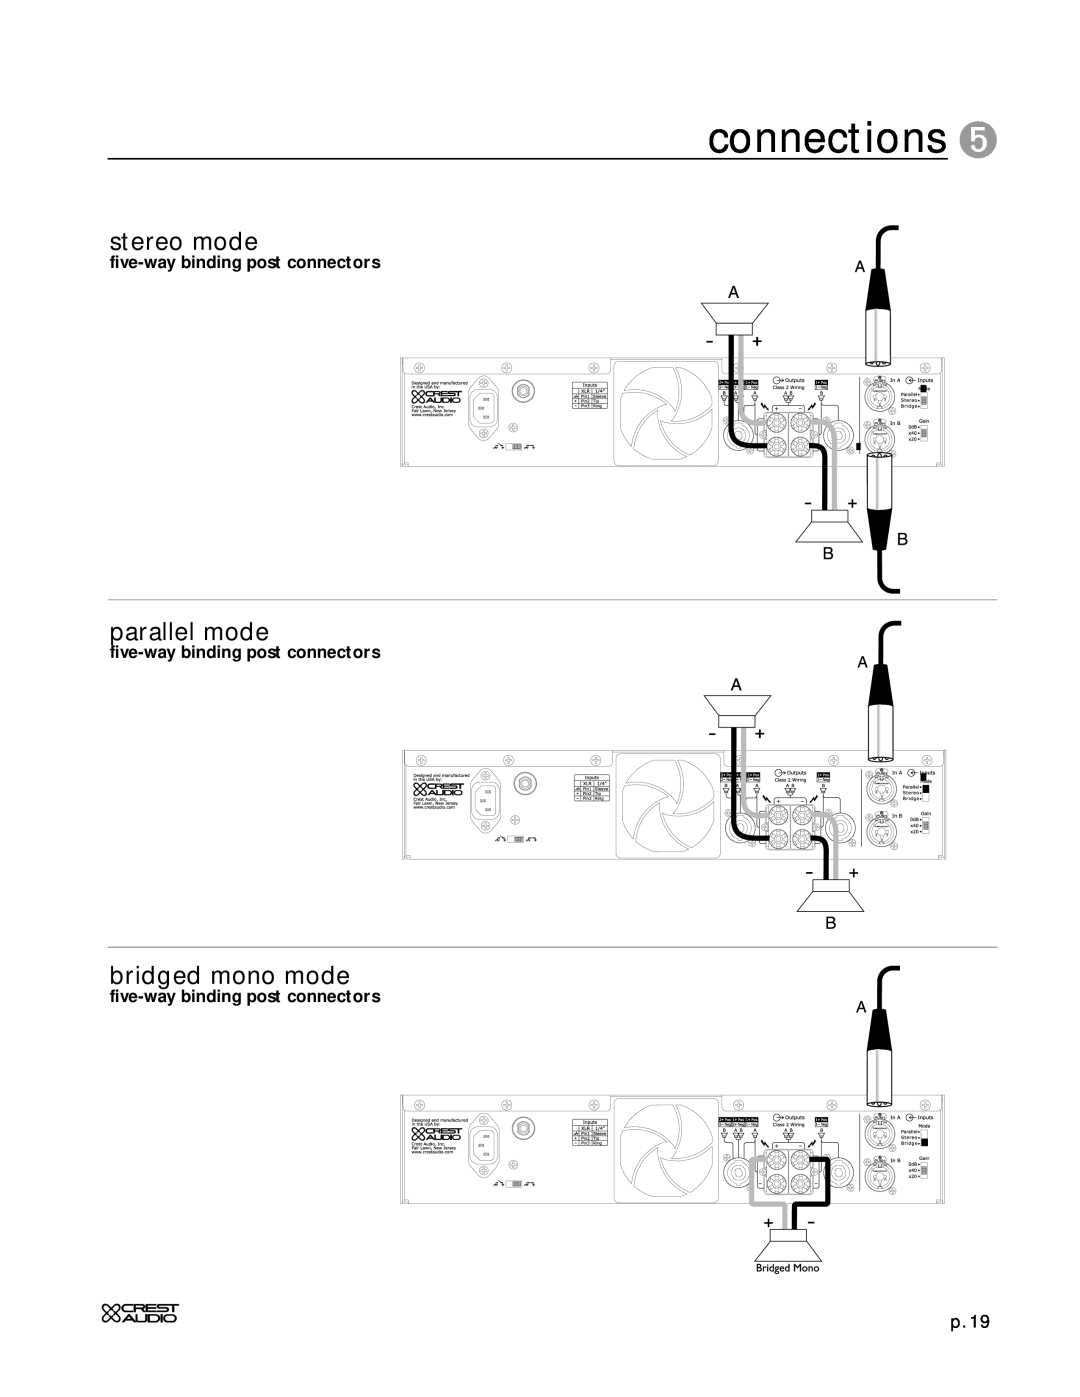 Peavey CD Series stereo mode, parallel mode, bridged mono mode, connections, five-waybinding post connectors, p.19 